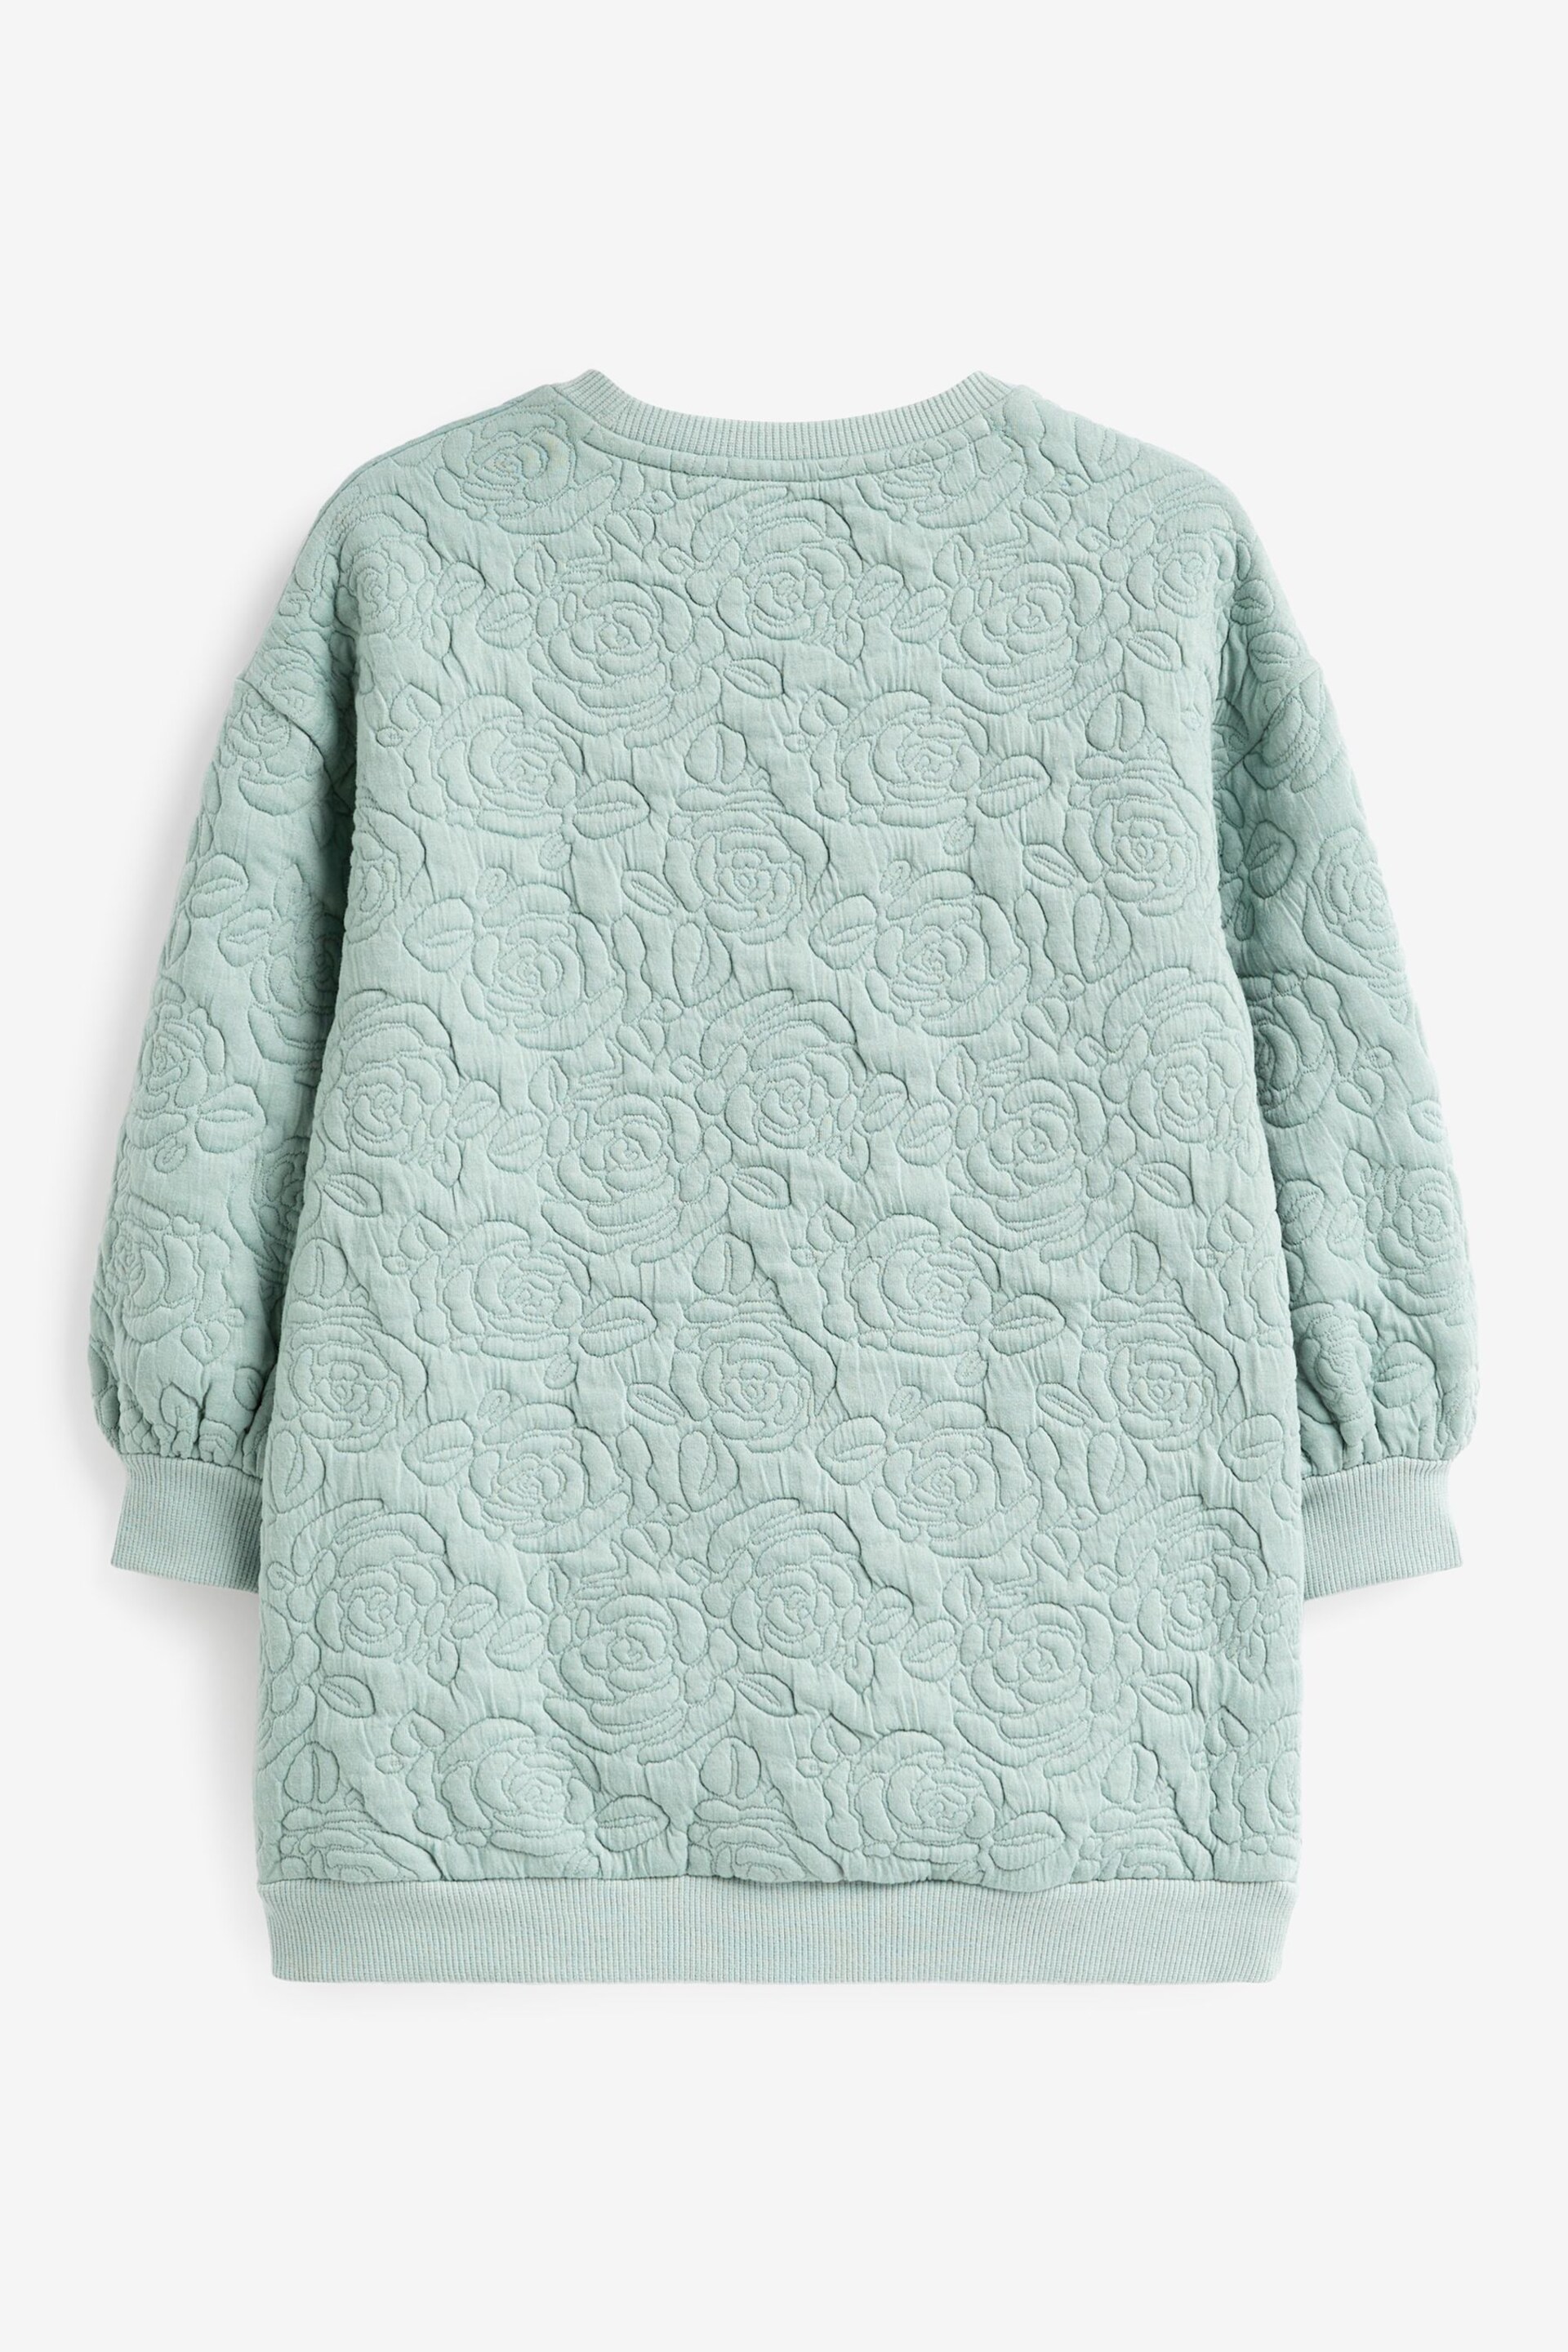 Mint Green/ Blue Floral Quilted Soft Jumper Dress (3-16yrs) - Image 6 of 6